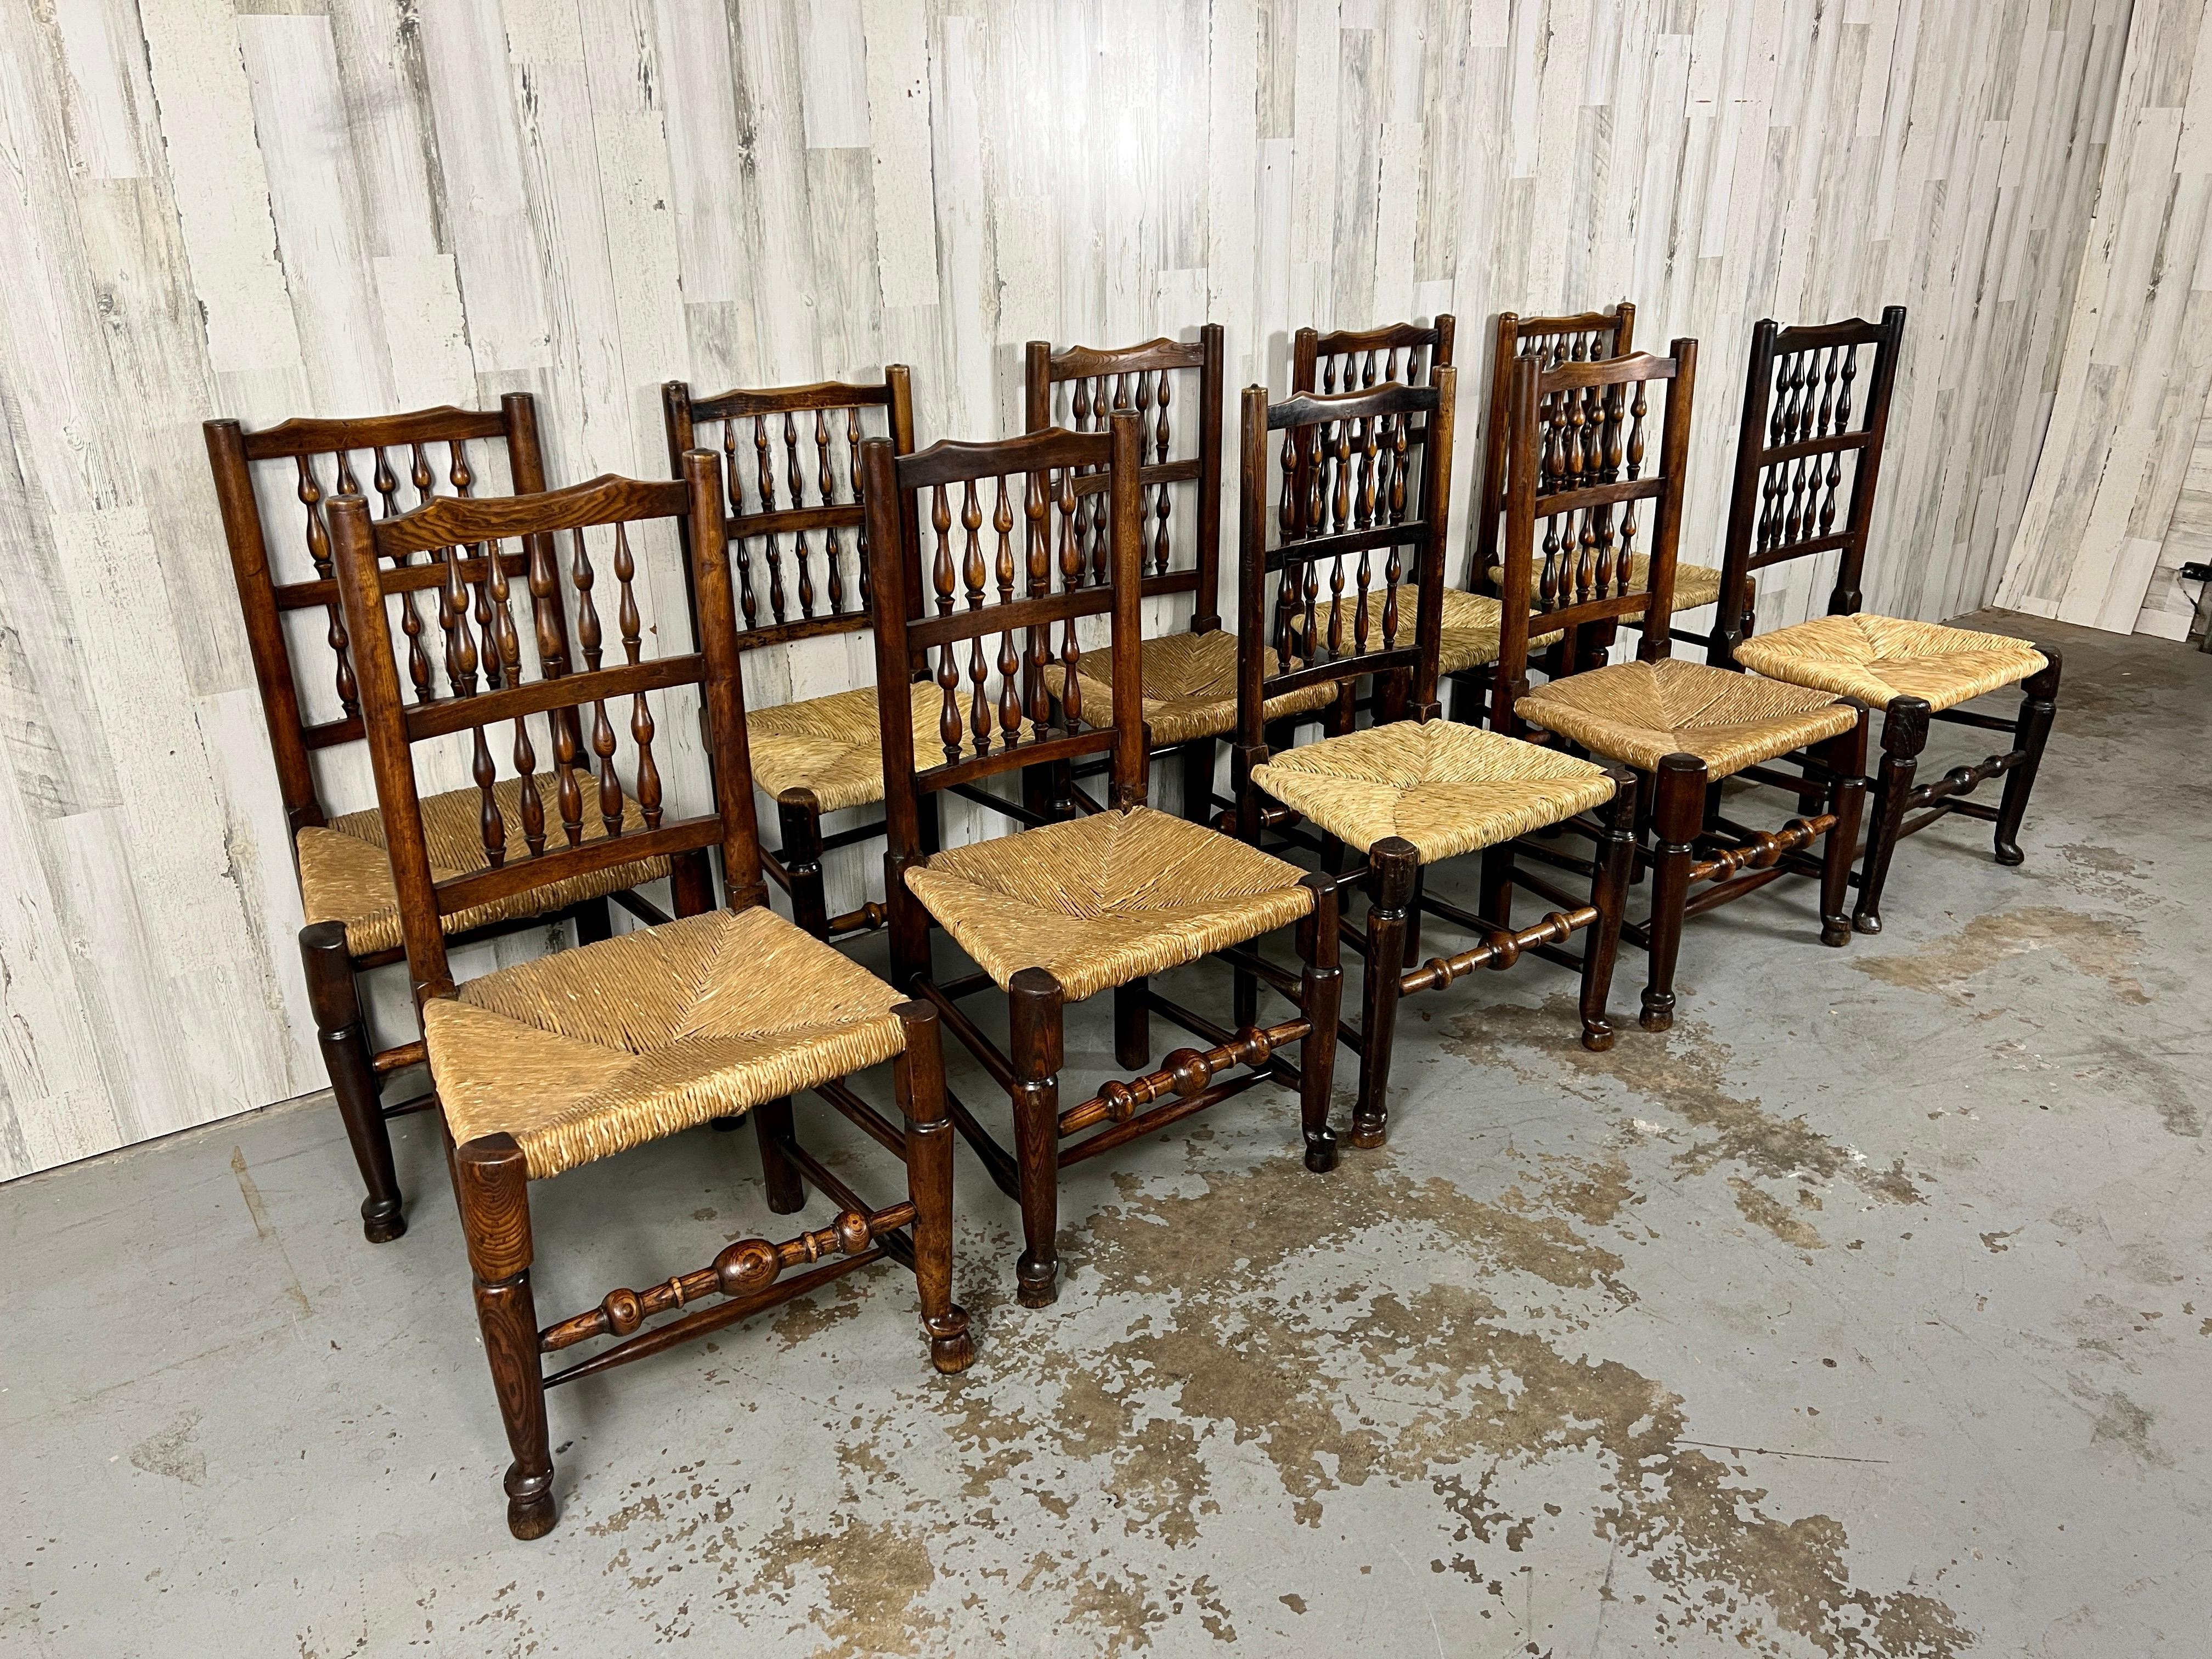 Georgian antique harlequin spindle back dining chairs with woven rush seats
Some of the chairs are taller than the others. Appears to be a set of four married with a set of six. each chair has its own personality.
Shorter chairs measure: 37.5 H x 19